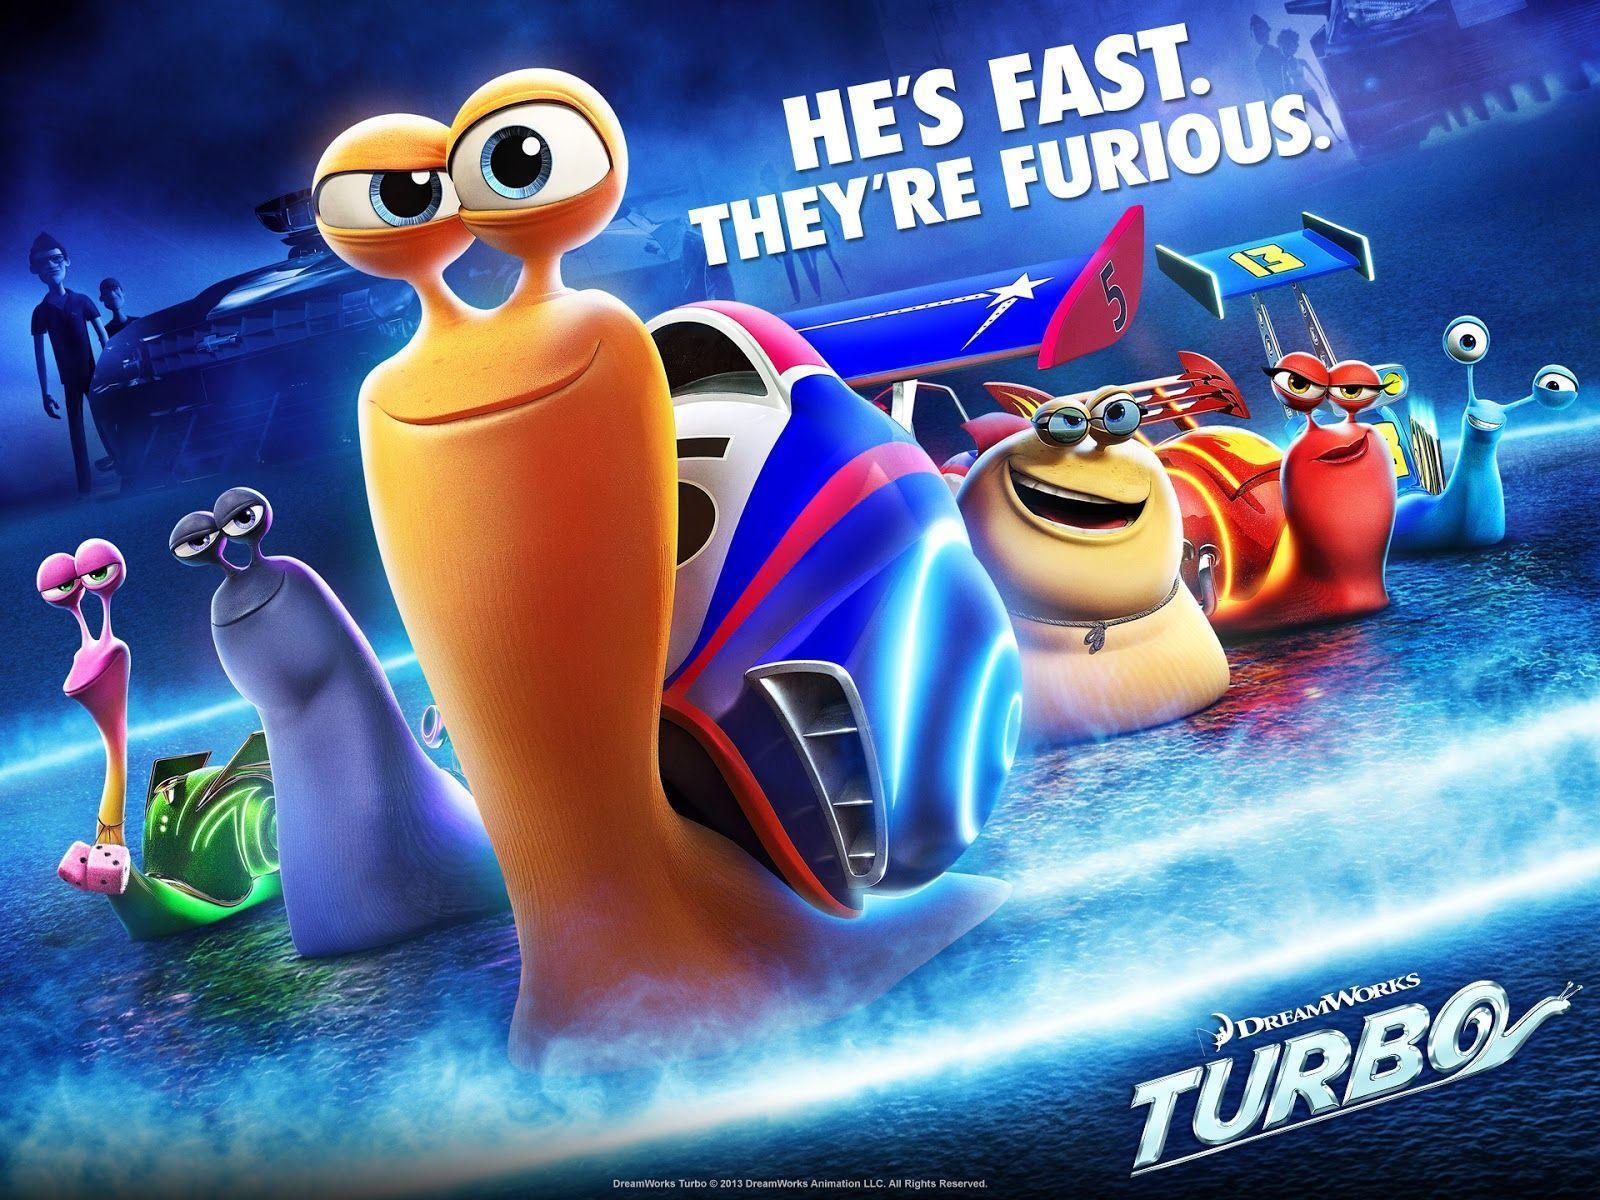 DreamWorks Turbo Movie HD Wallpaper Character Posters Download